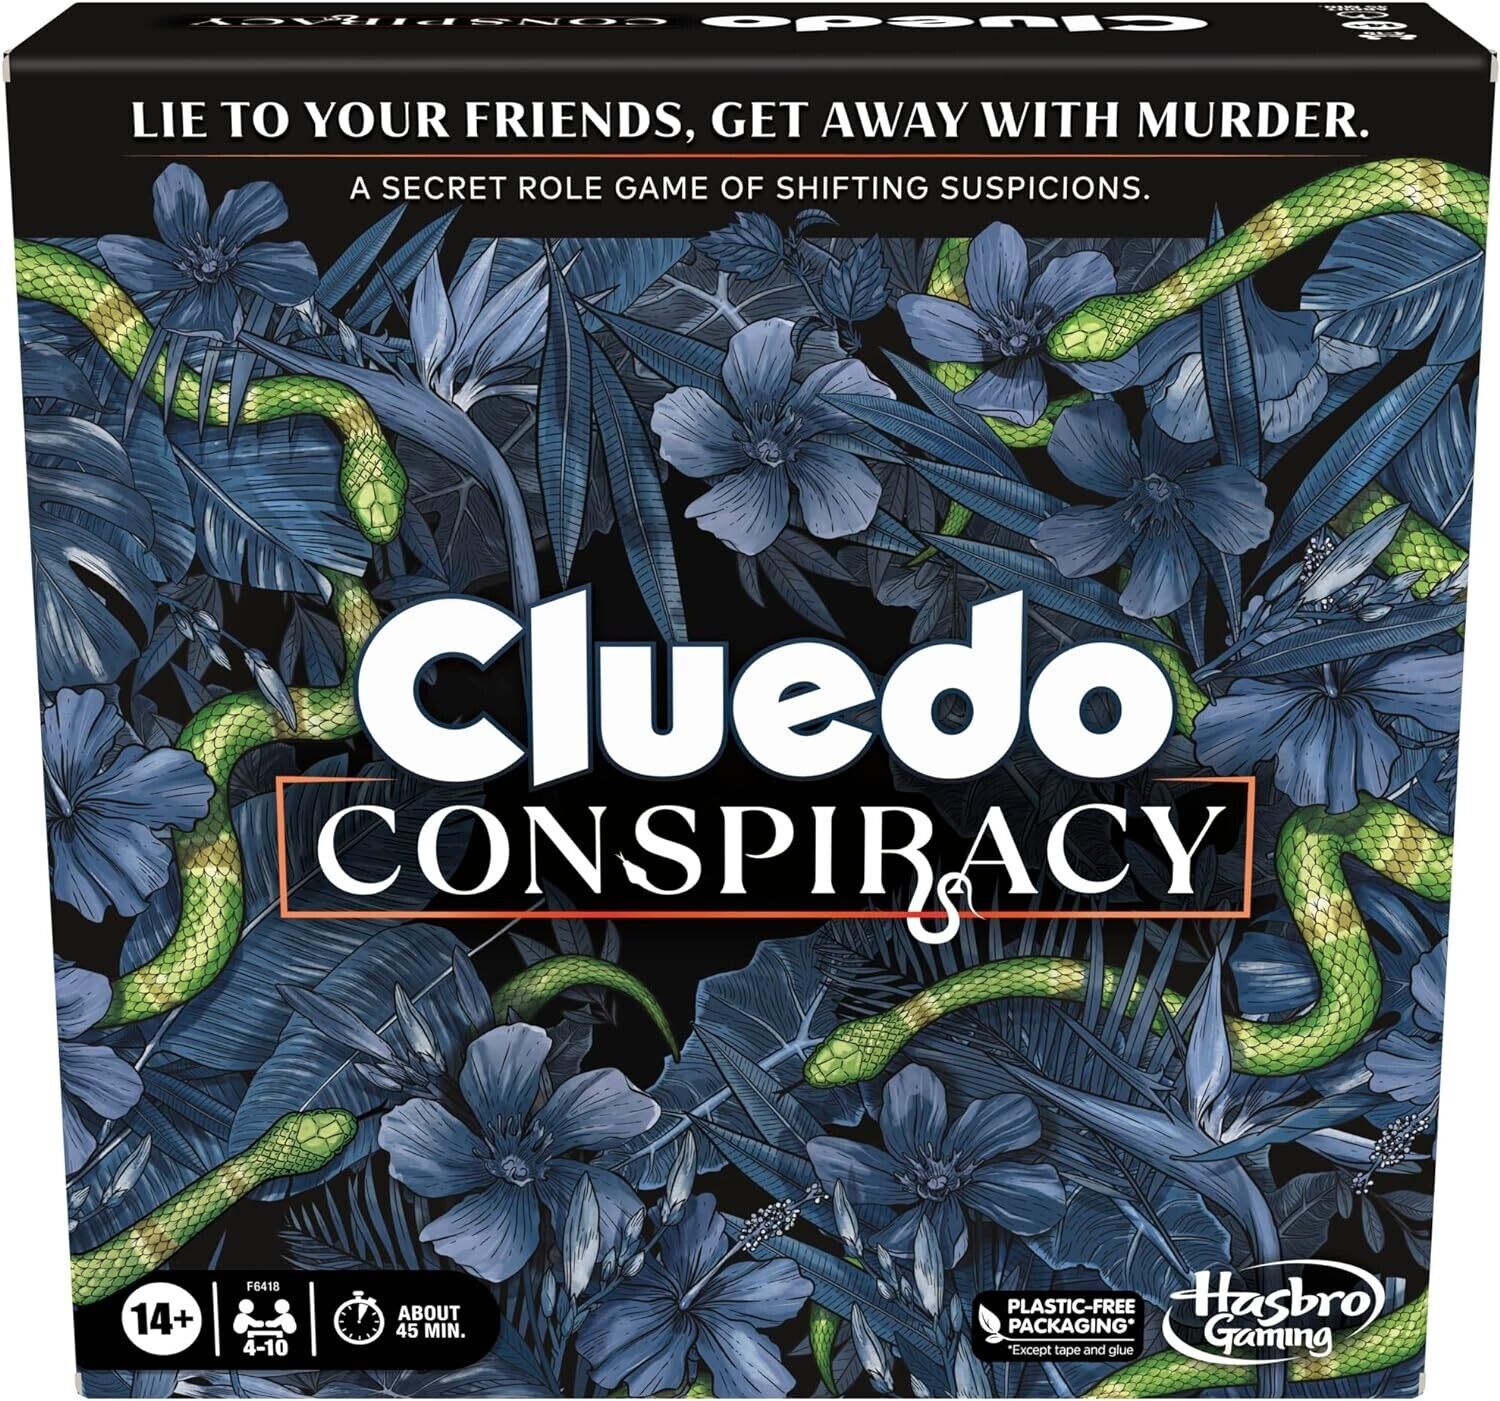 Cluedo Conspiracy Board Game for Adults and Teens